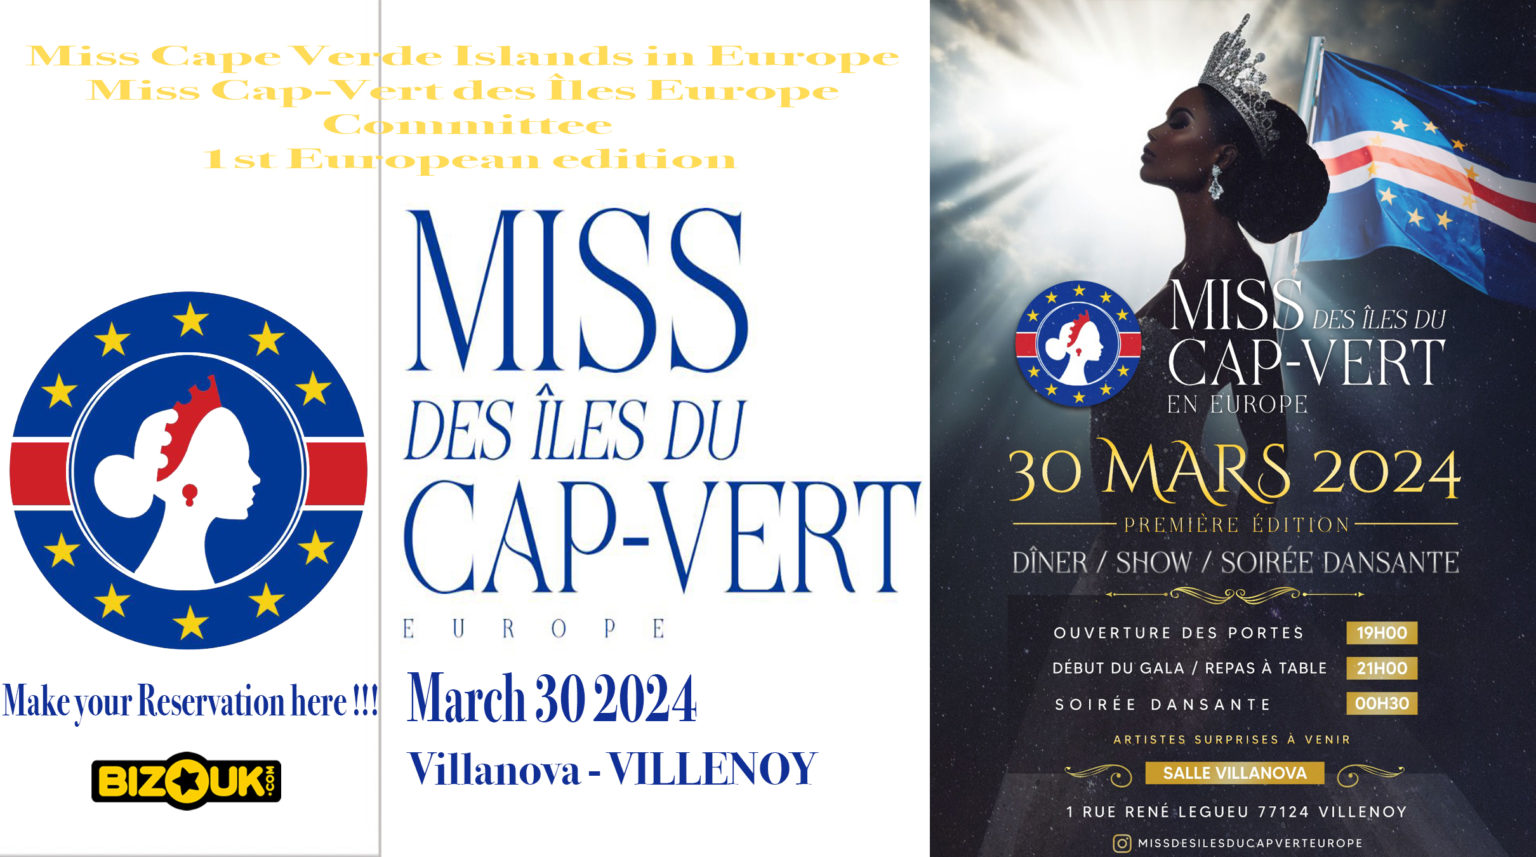 AFRICA-VOGUE-COVER-Miss-Cape-Verde-Islands-in-Europe-Miss-Cap-Vert-des-Iles-Europe-Committee-presents-the-1st-European-edition-DN-AFRICA-Media-Partner-